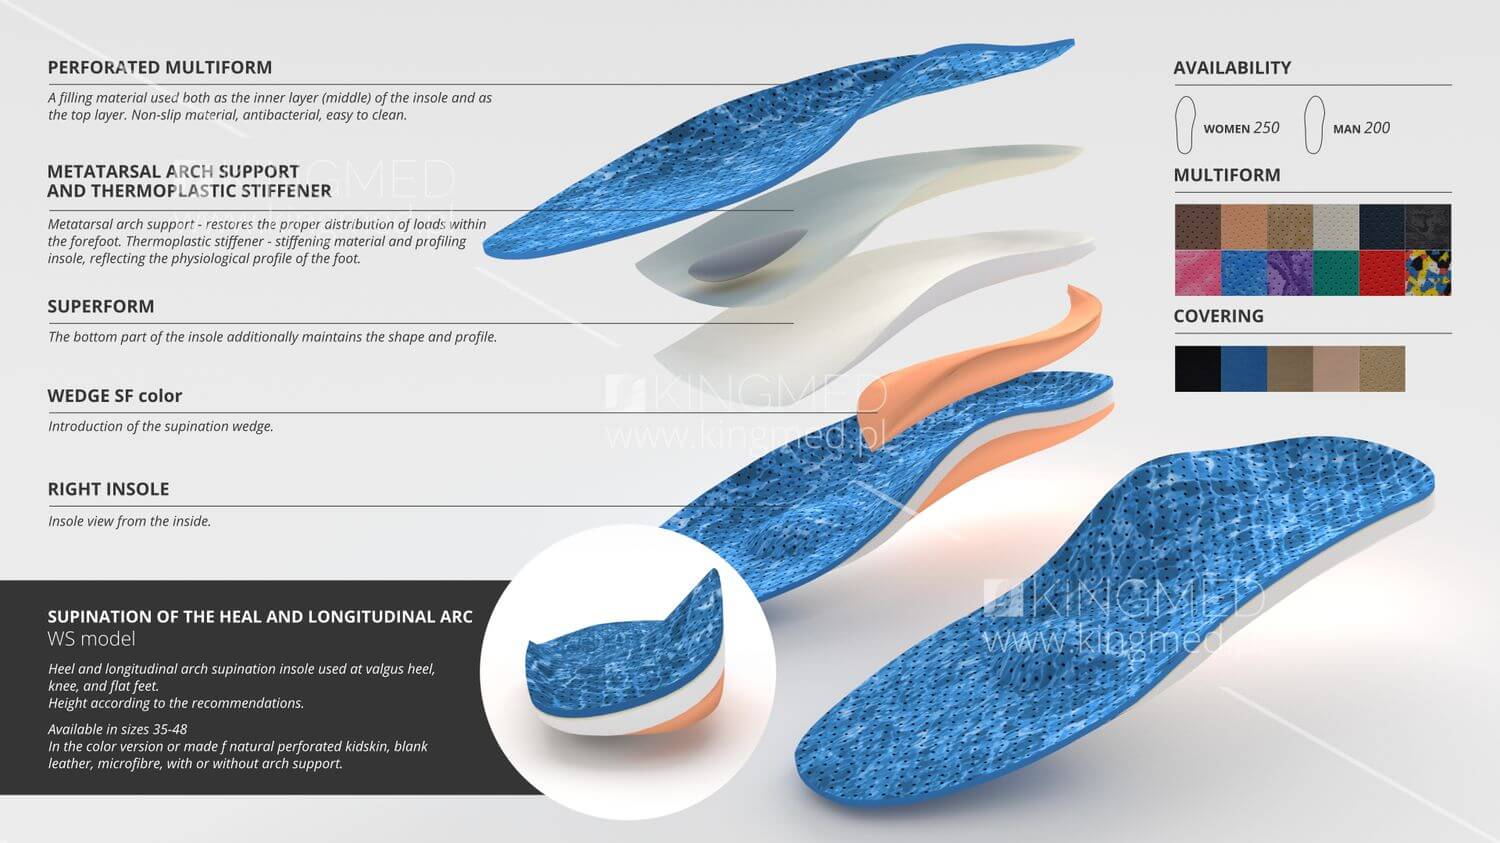 Orthopedic insoles supination of the heal and longitudinal arc WS modelOrthopedic insoles supination of the heal and longitudinal arc WS model